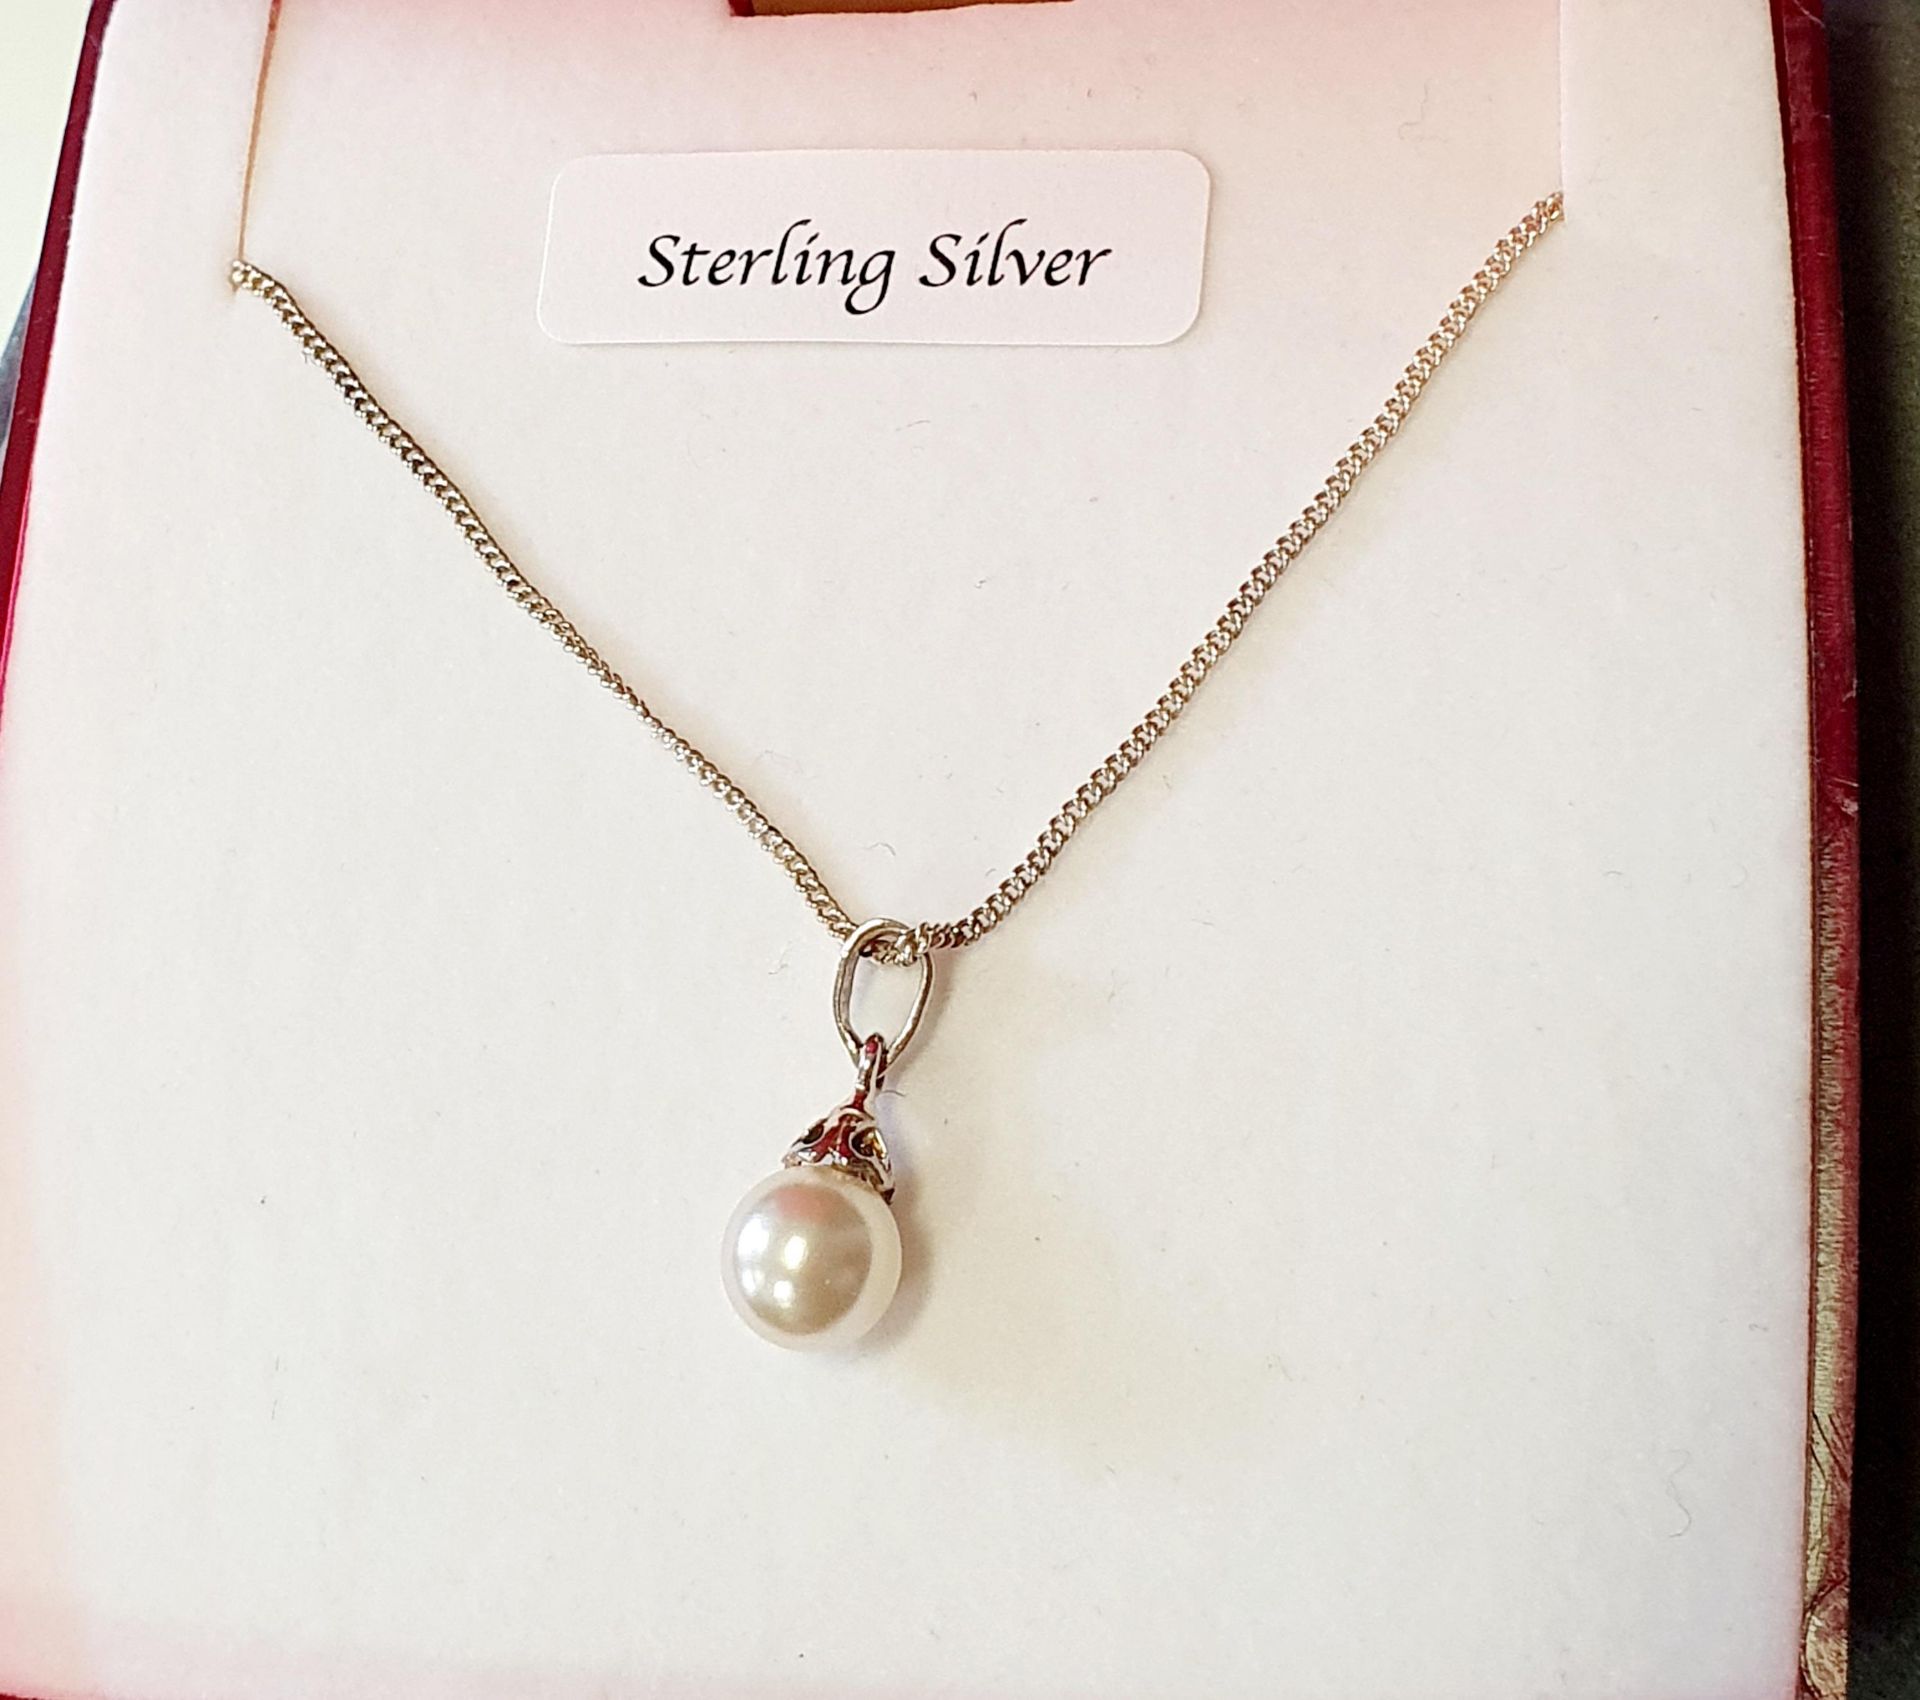 beautiful sterling silver chain & Pendant